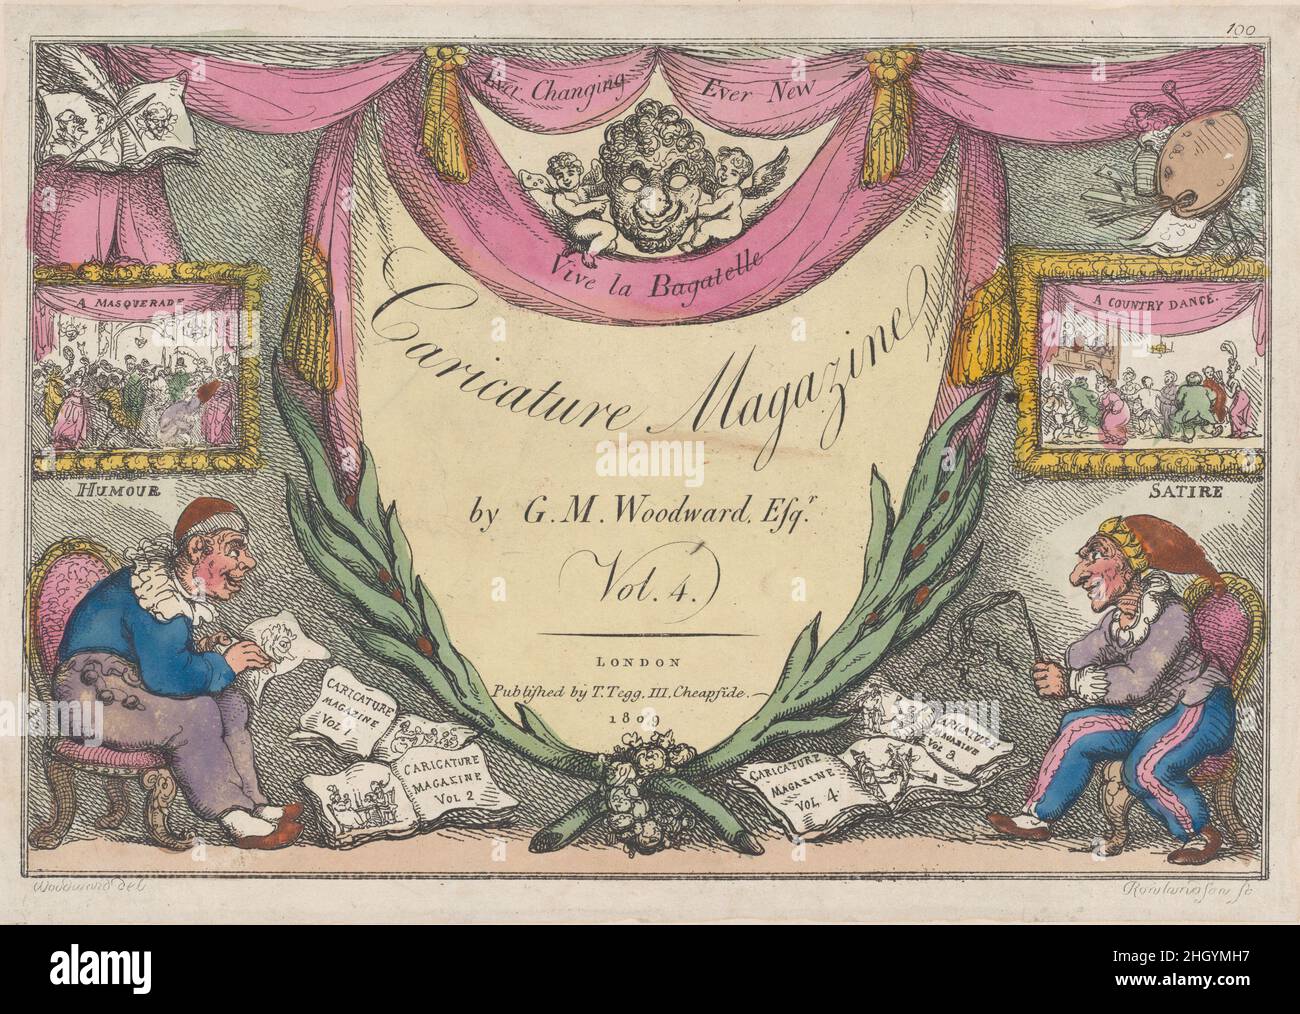 Title Page, The Caricature Magazine by G. M. Woodward, Vol. 4 1809 Thomas Rowlandson Tegg's 'Caricature Magazine' first appeared in 1807 and each issue was given a different title page. This example introduced volume 4 in 1809; it would be put to use again in 1821 with a revised date and different hand coloring (see 59.533.1716). Two figures below may represent the artist Woodward and Tegg, with the man at left sketching a caricature and sitting below a framed image of a Masquerade and the word Humour; that at right holding a whip and sitting beneath a picture of a Country Dance and the word S Stock Photo